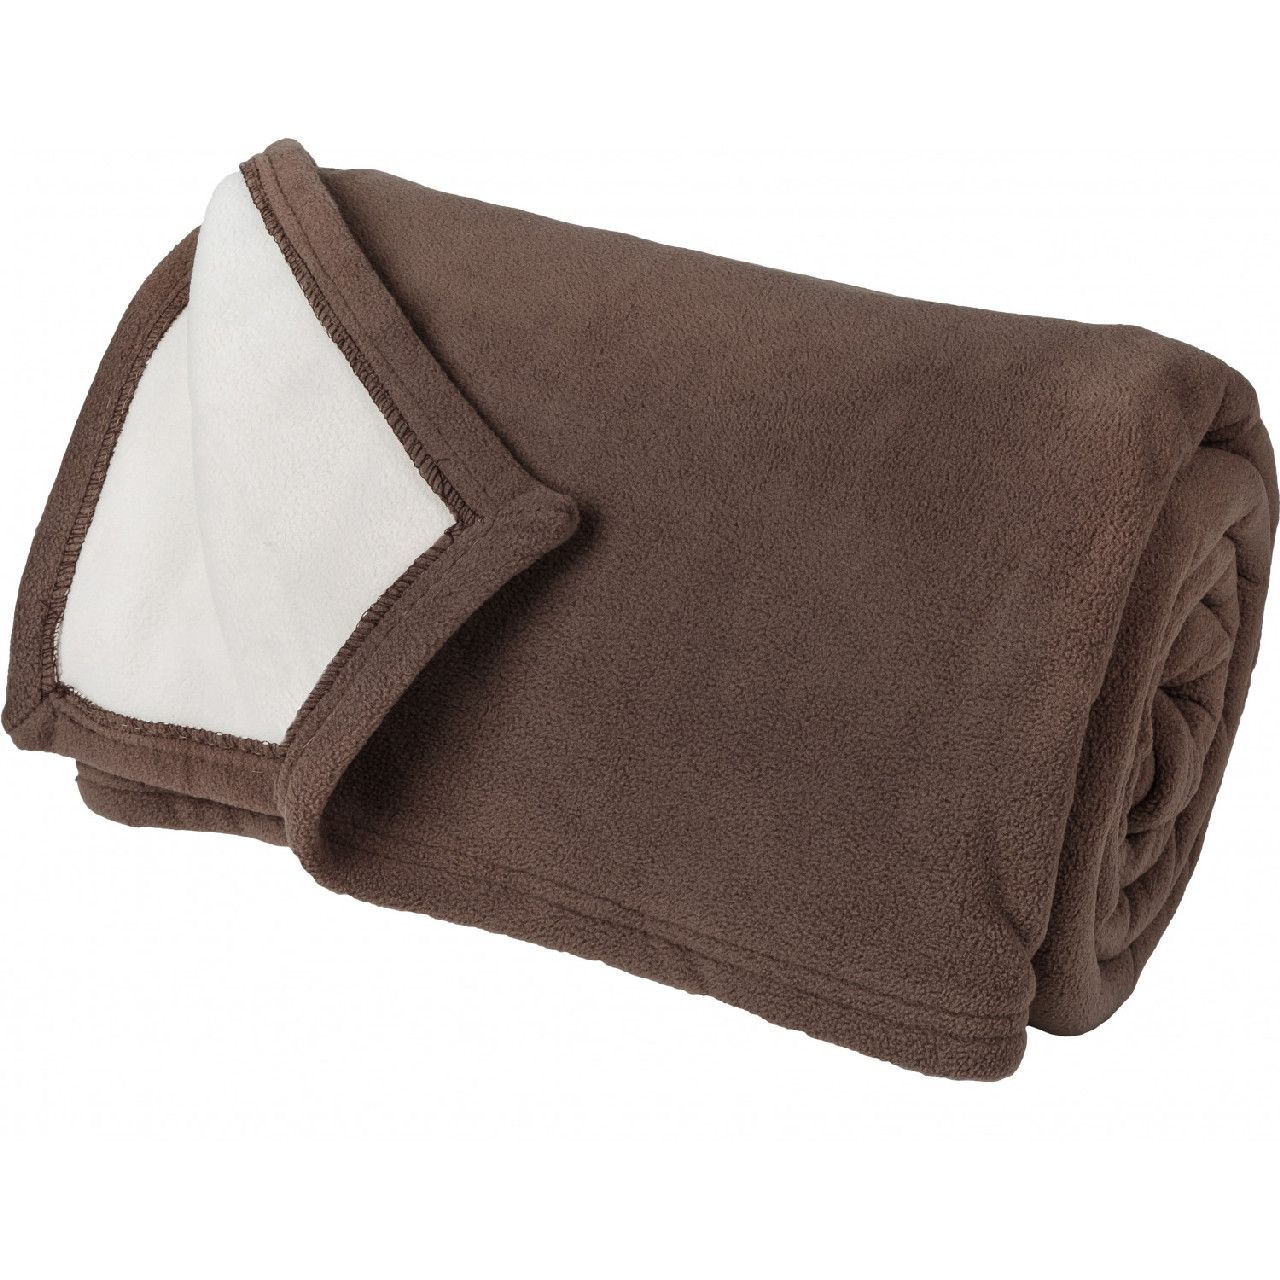 Couverture polaire Teddy en polyester uni Taupe 240x260 - Toison d'Or